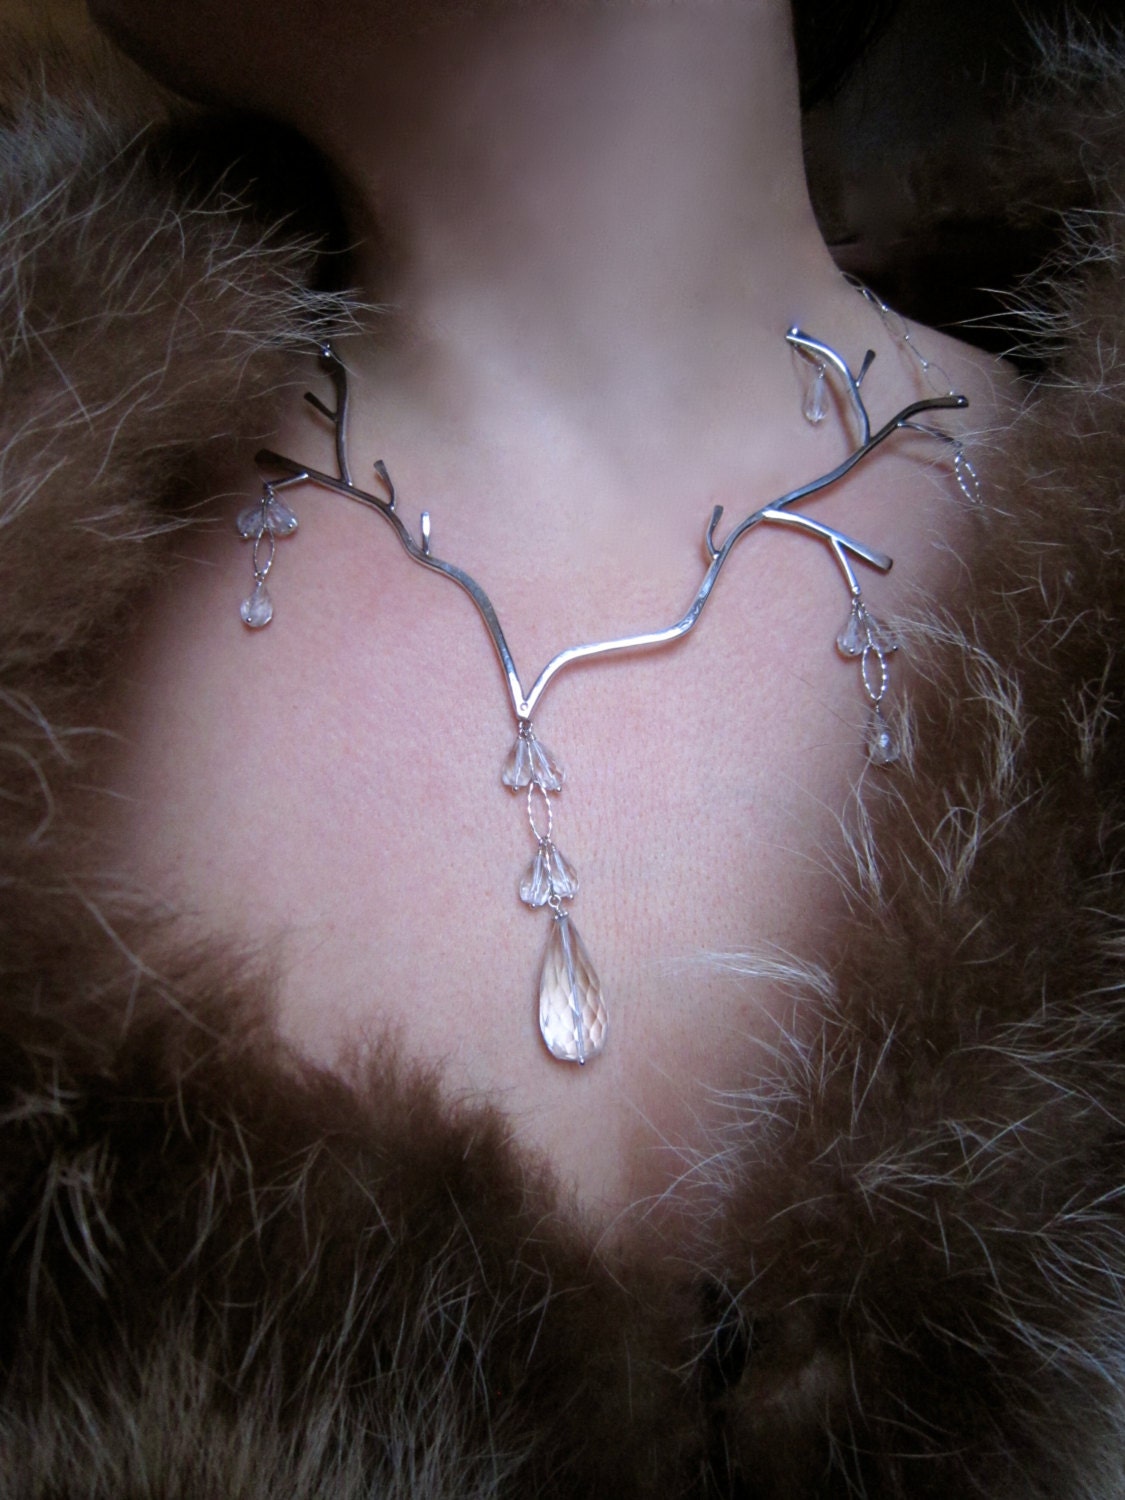 Winter wonderland - Icy branches statement necklace in sterling silver and natural quartz crystal - noracatherine